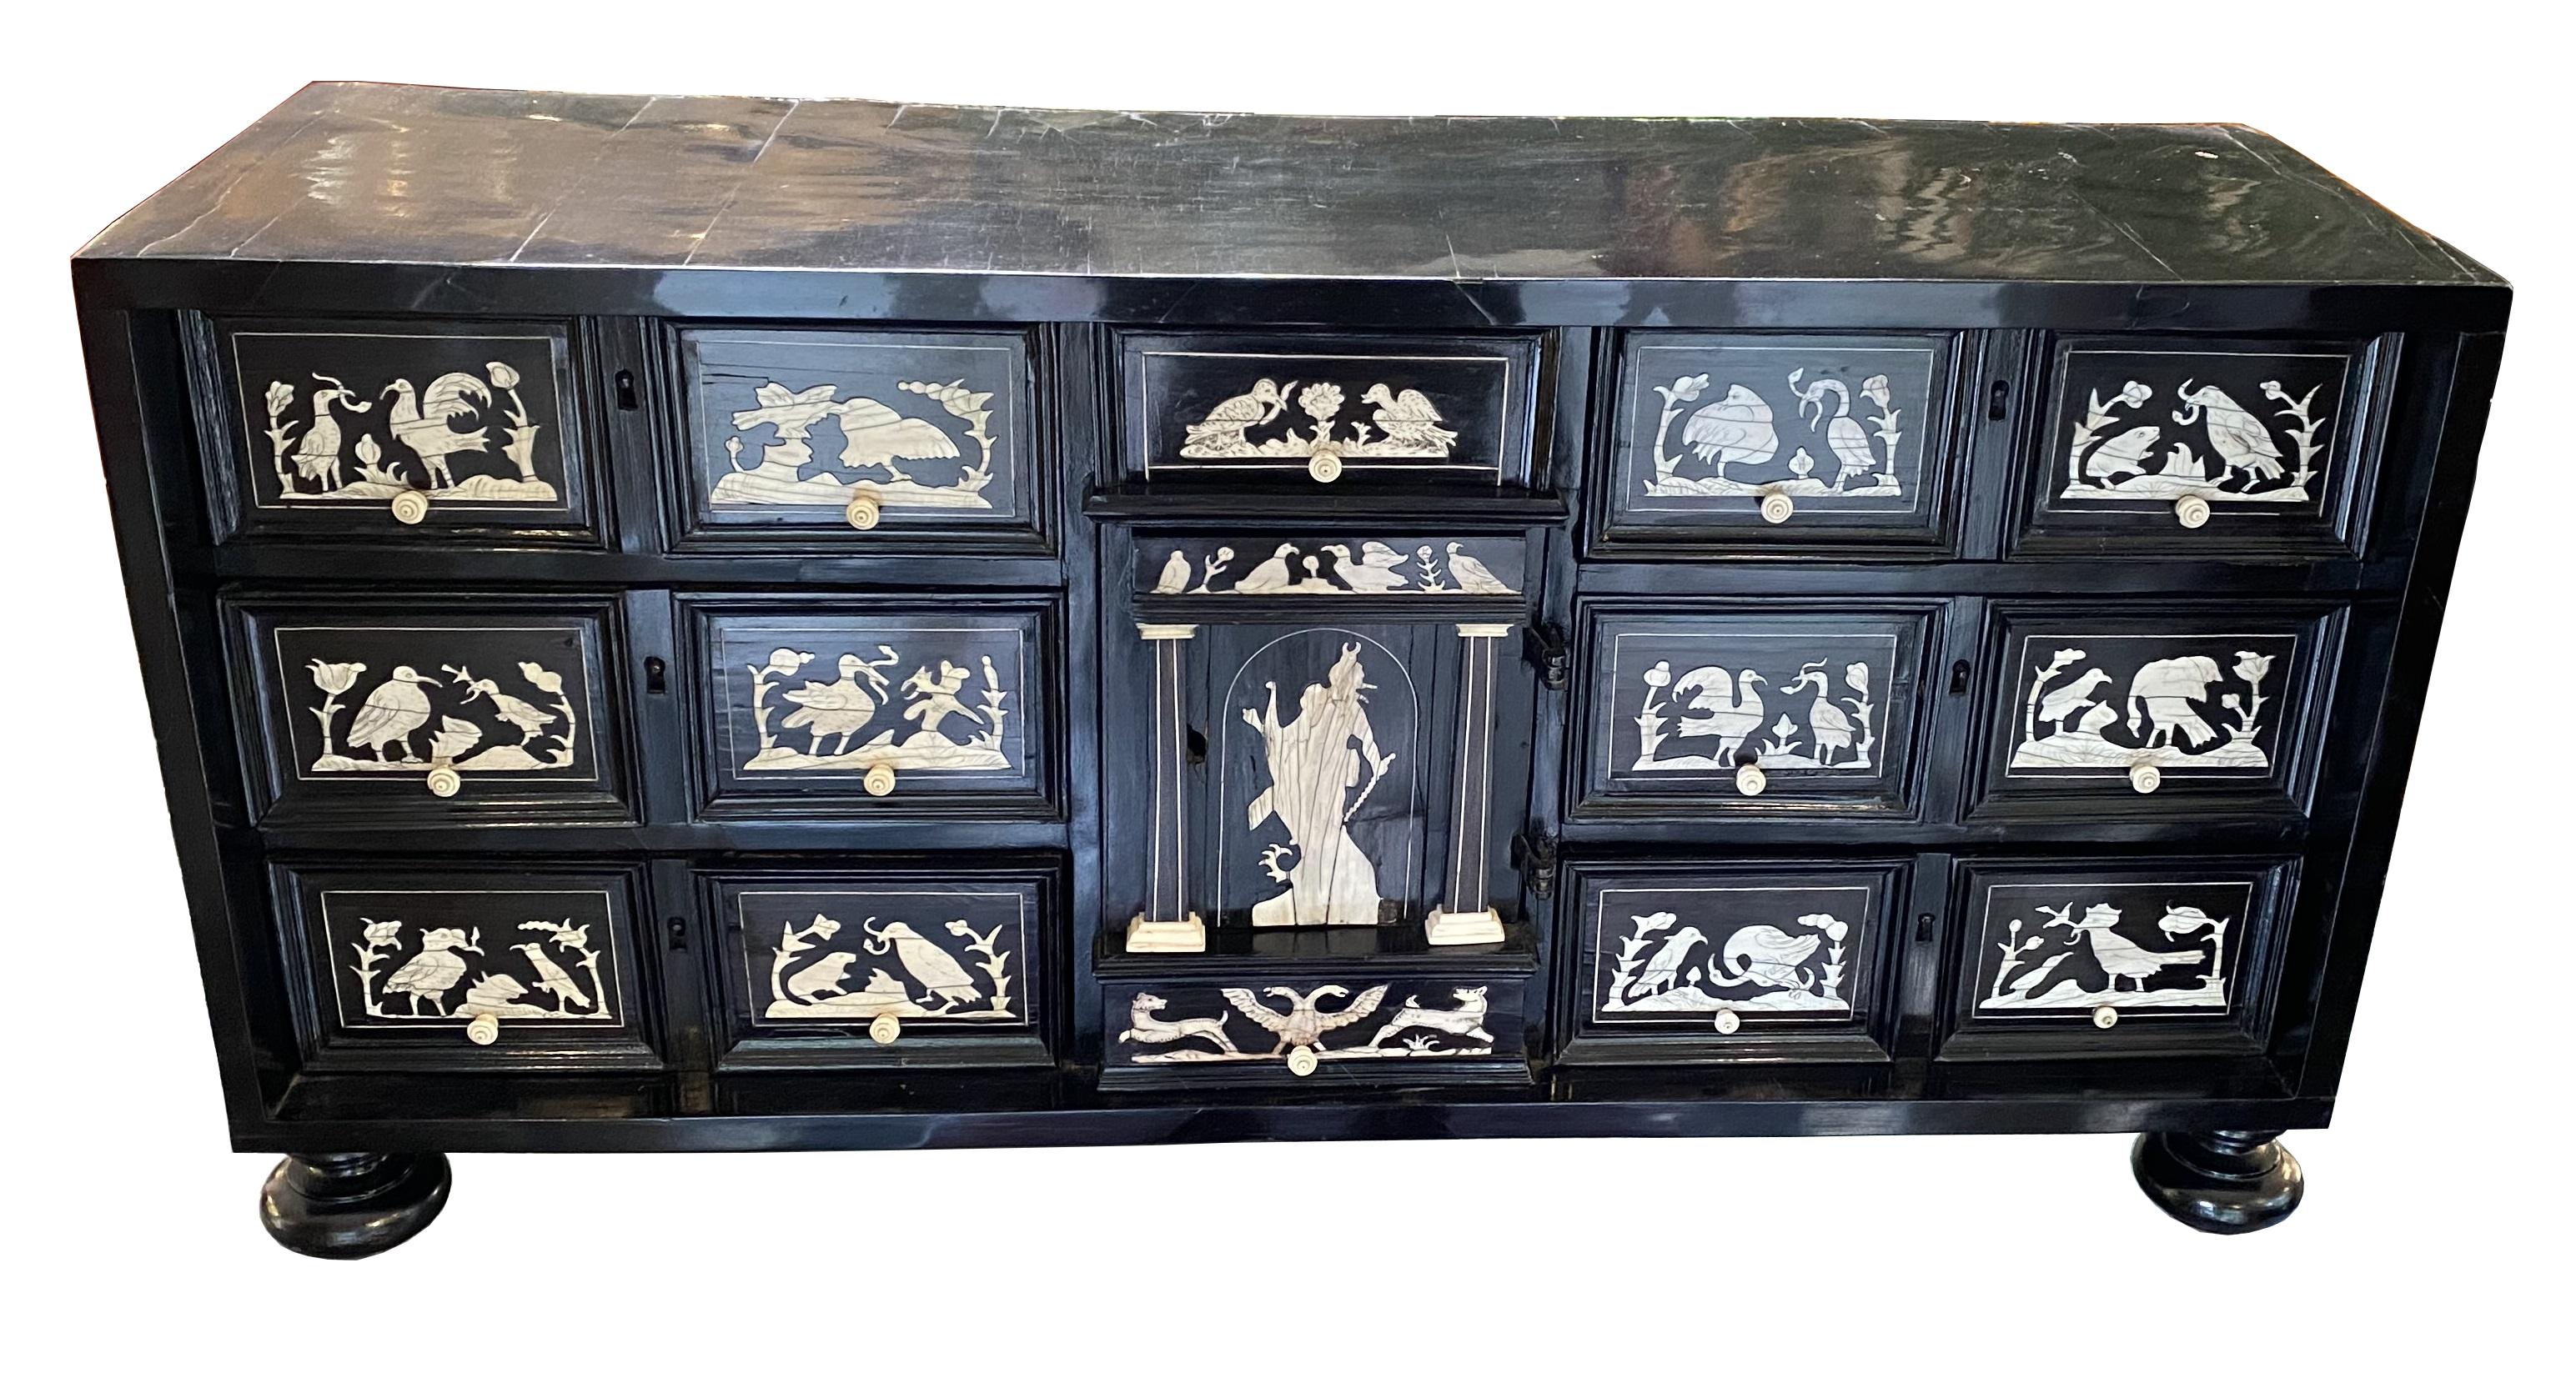 17th century cabinet from northern Italy, Milan.
Ebony veneer and bird decoration in ivory inlay.

Very good condition considering age.
Only restorations have been carried out over time, but the cabinet retains its unique patina and the construction